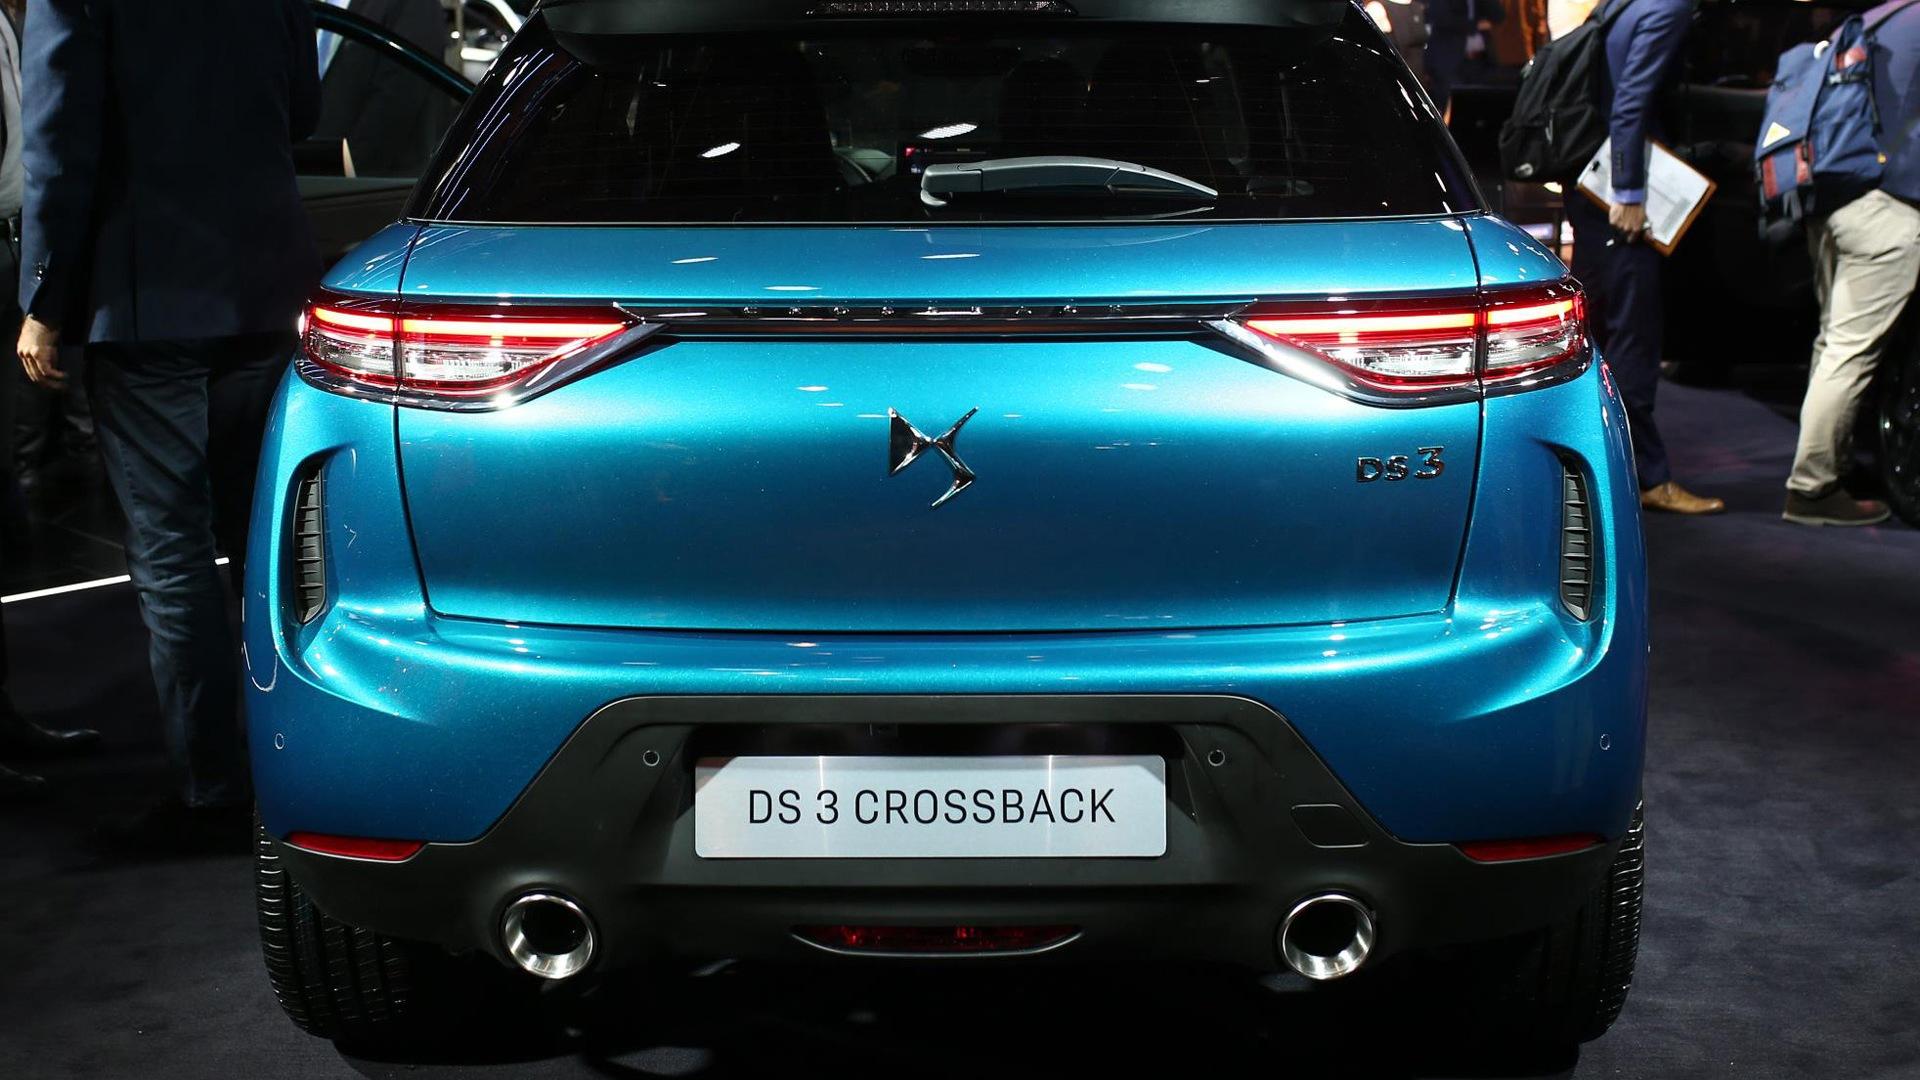 DS 3 Crossback: French luxury crossover debuts with EV option